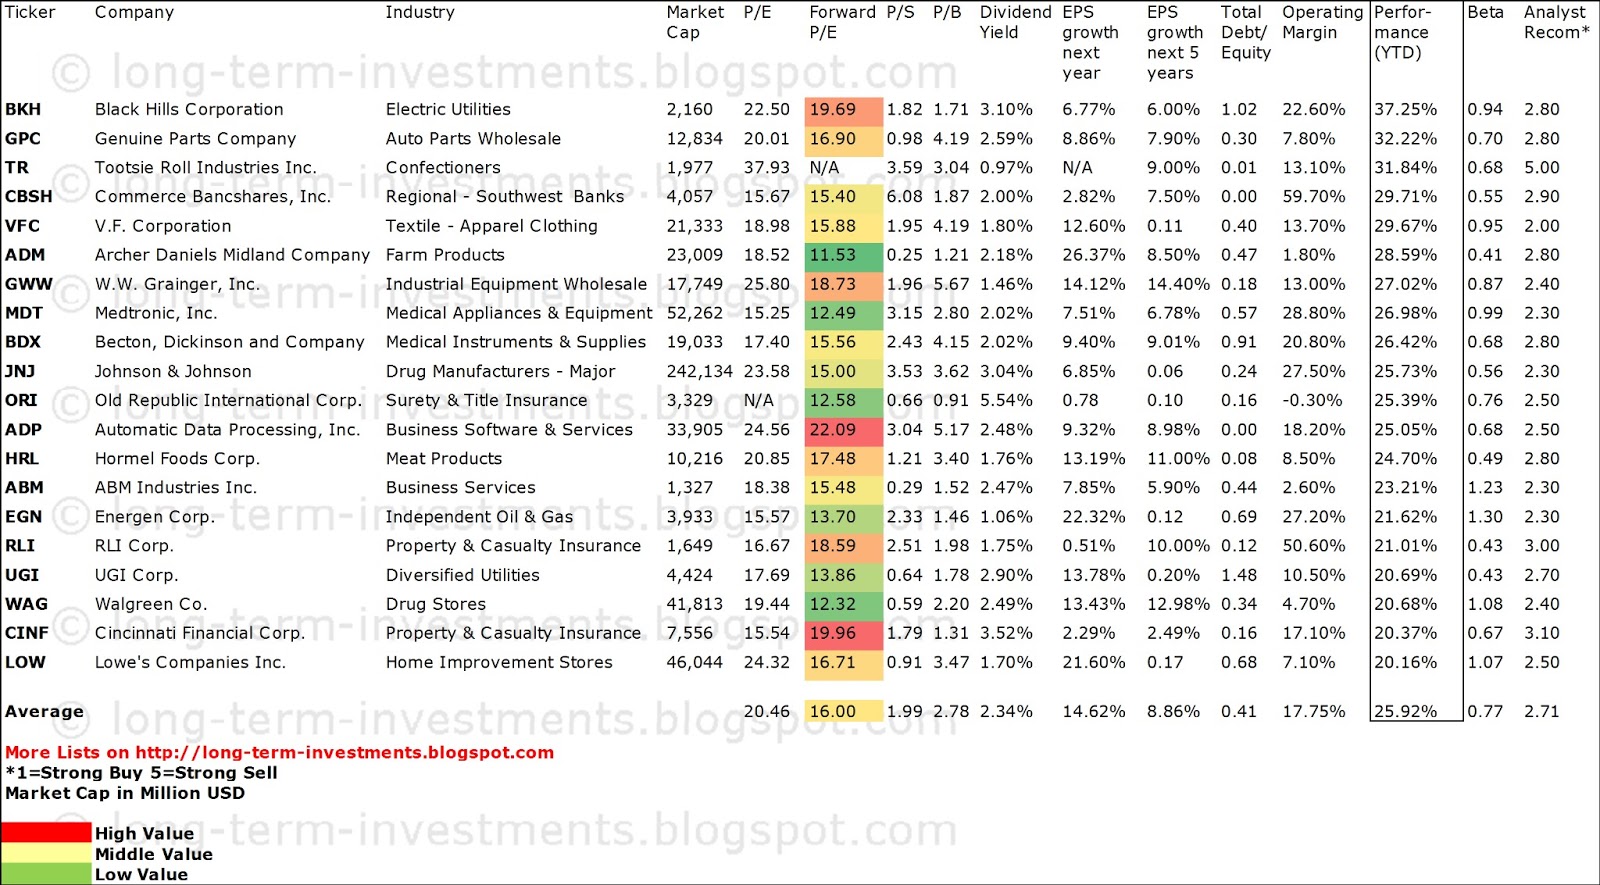 Best Performing Dividend Champions YTD